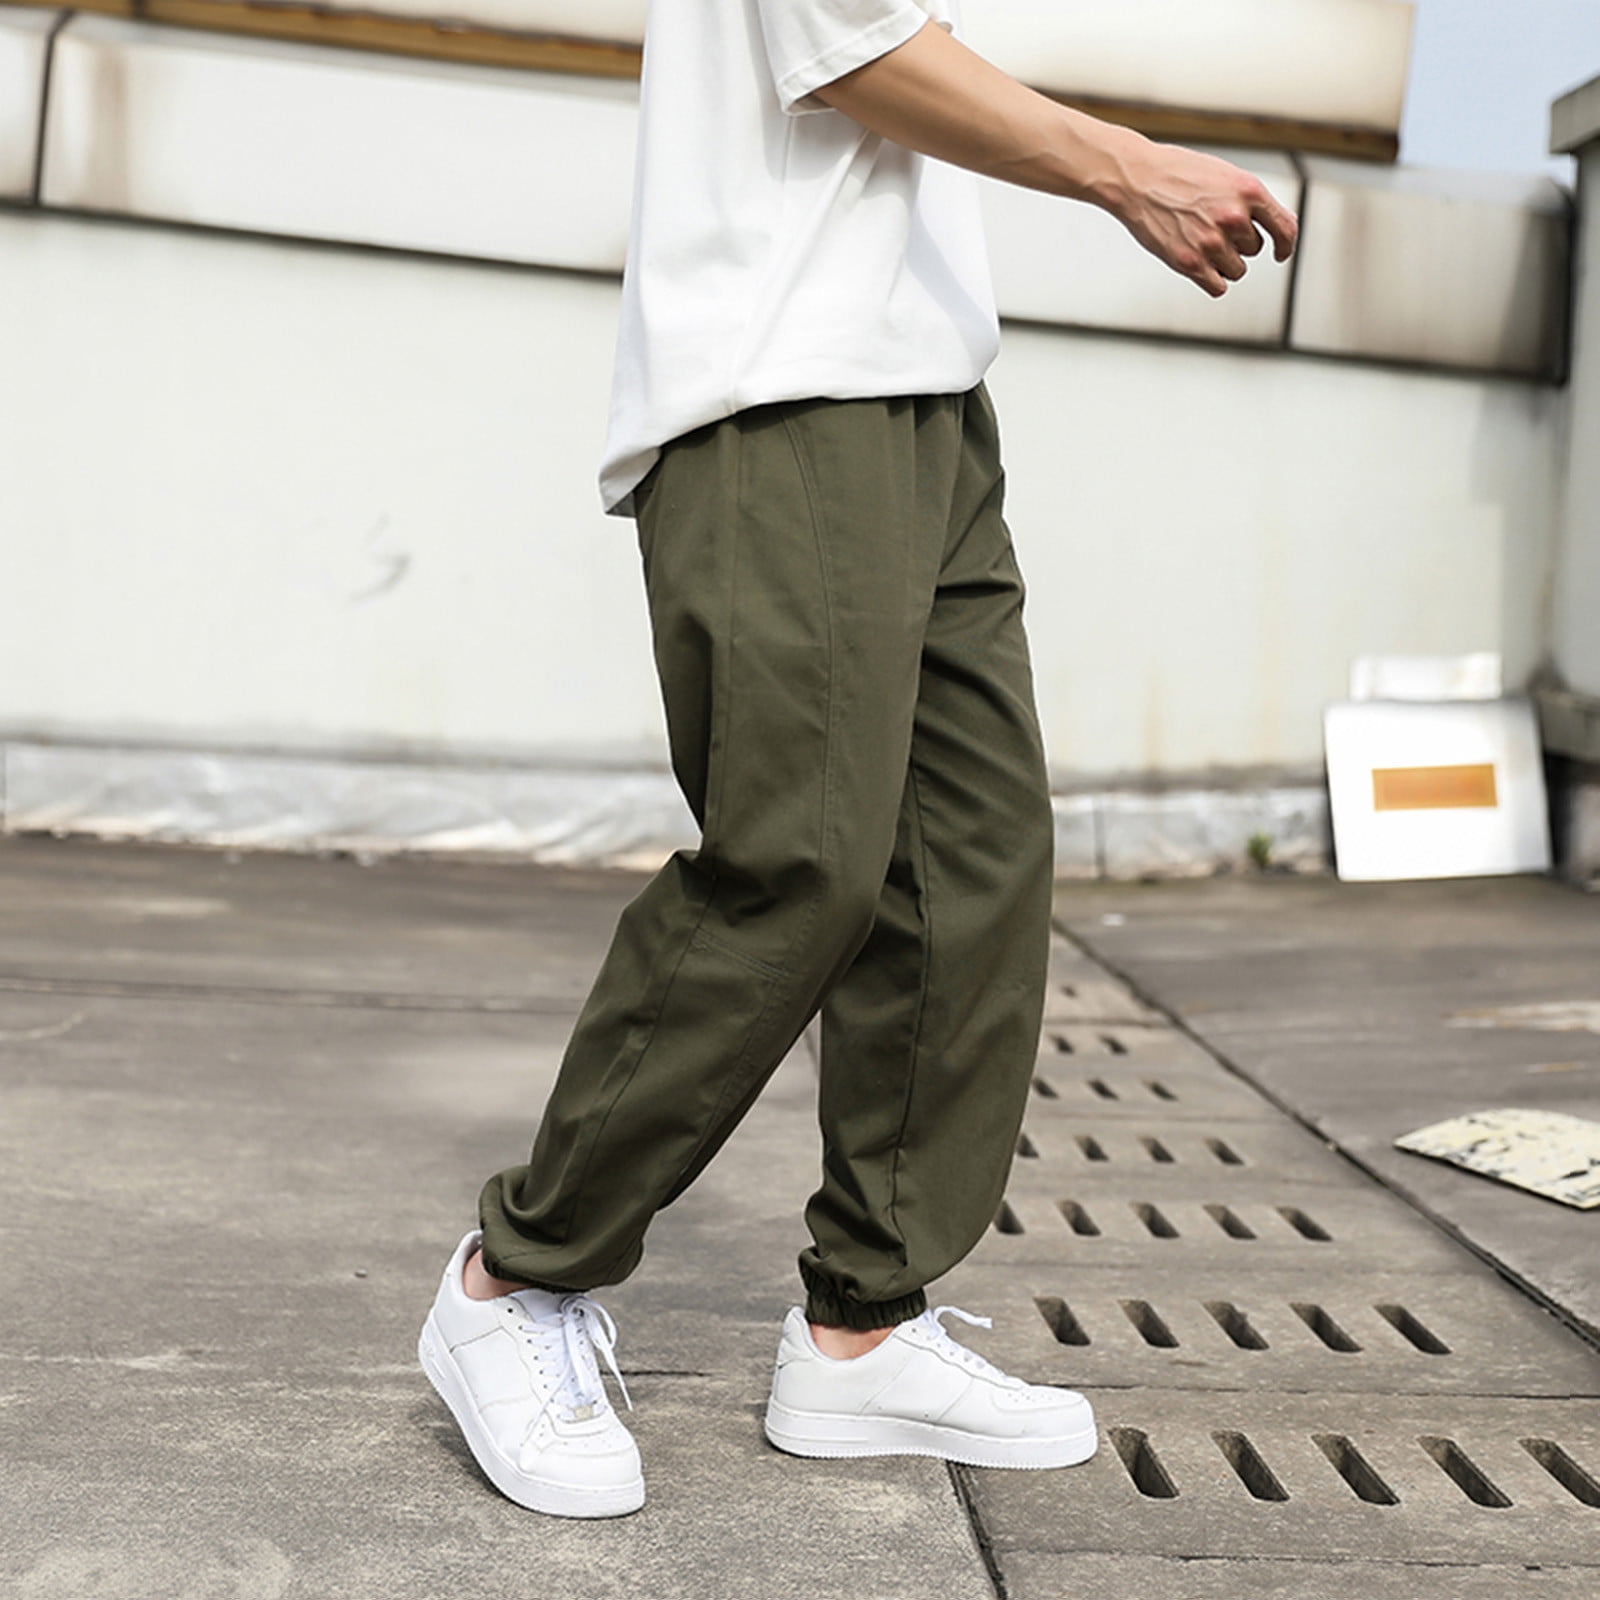 Beige Sweatpants with Beige T-shirt Outfits For Men (6 ideas & outfits)